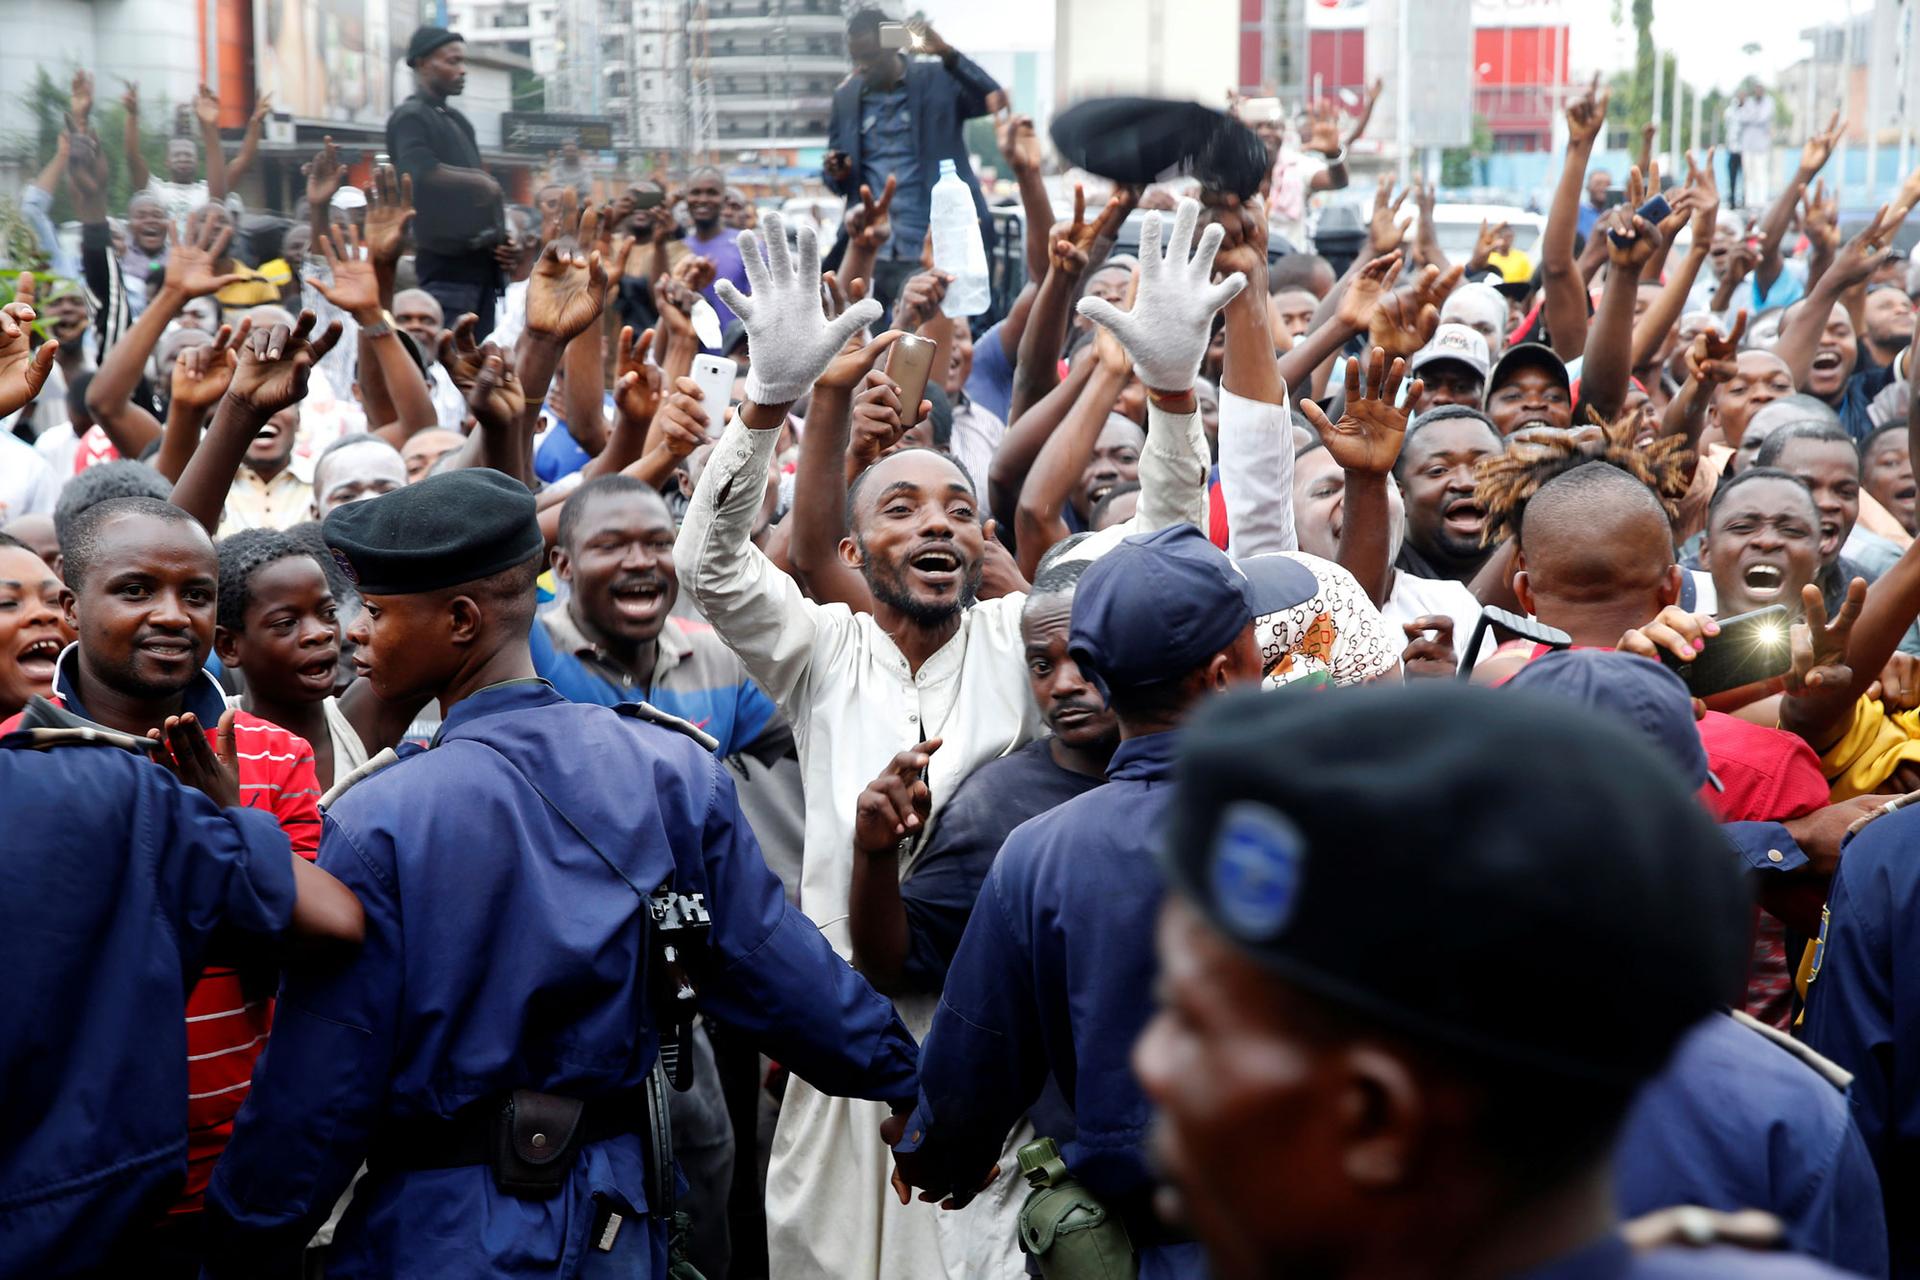 Supporters of Felix Tshisekedi are shown with their hands in the air celebrating in the streets of Kinshasa, Democratic Republic of Congo.